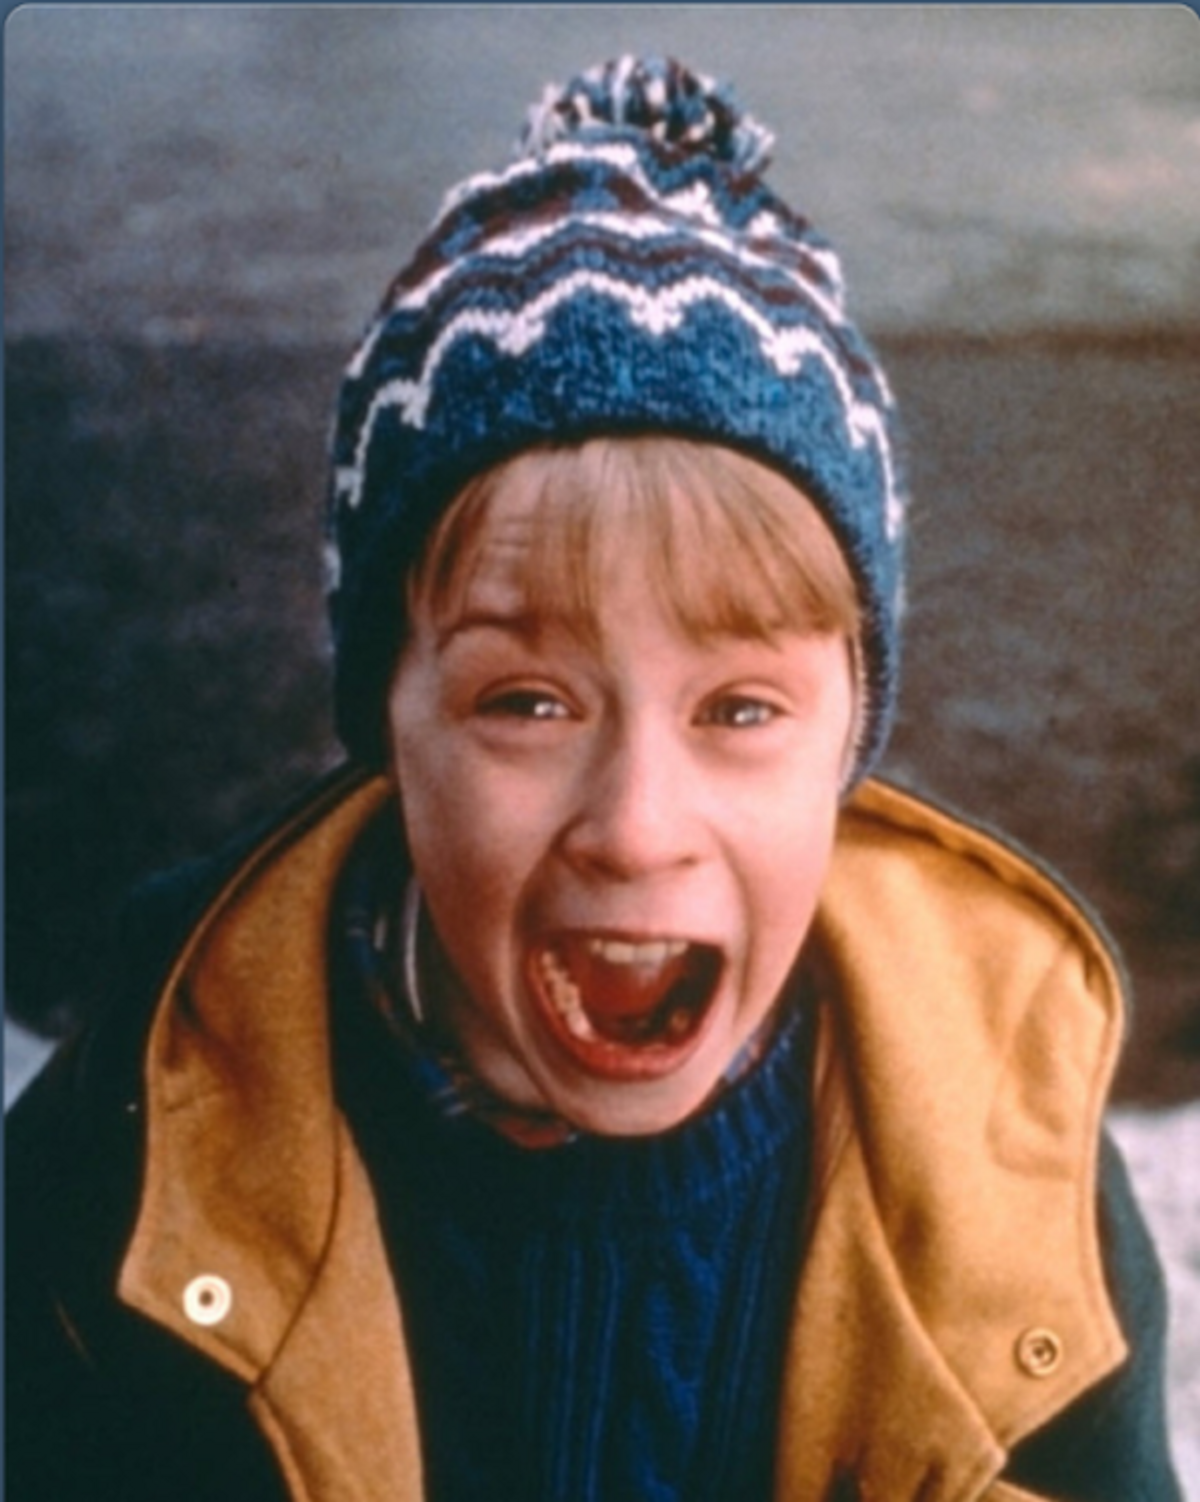 An Observation on "Home Alone"